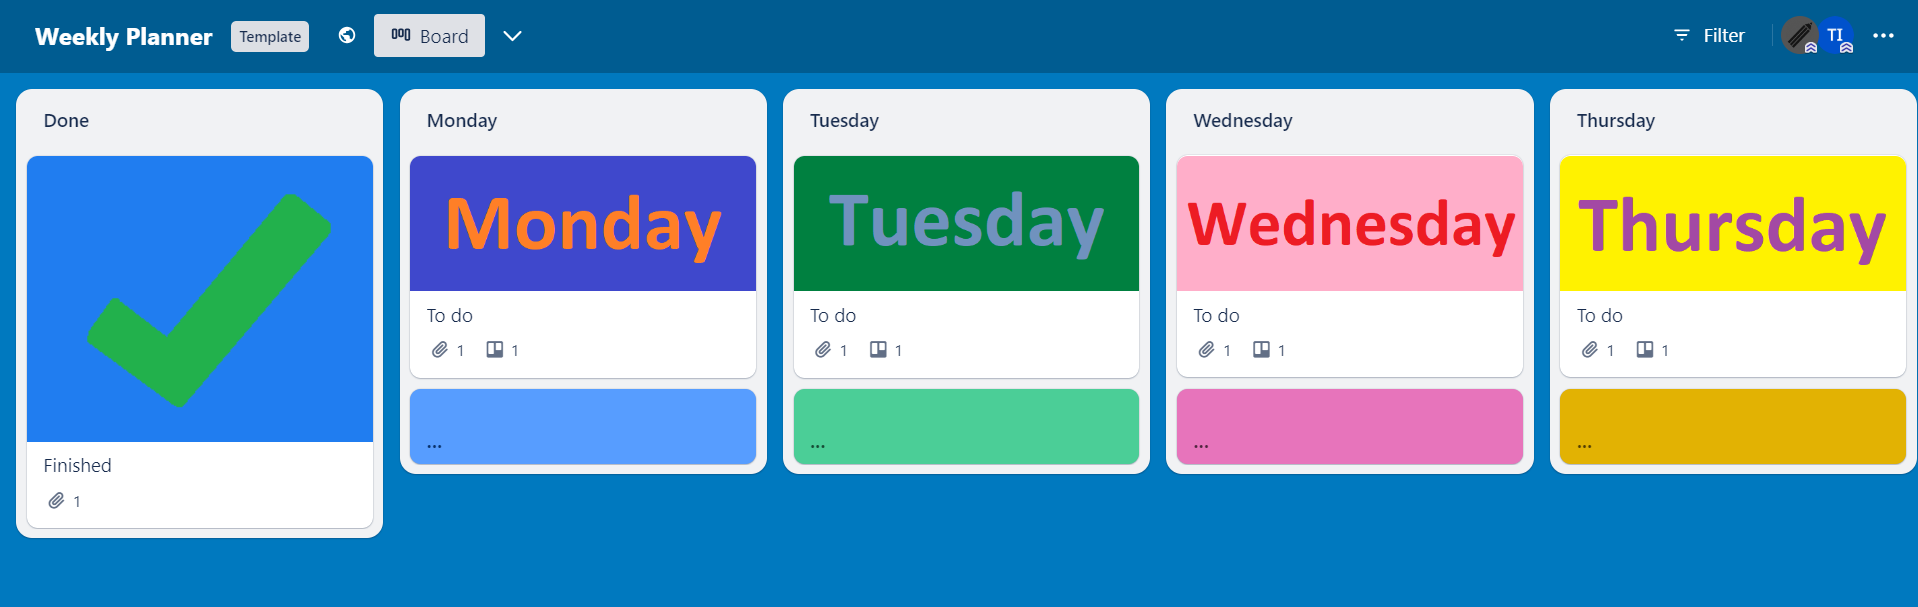 Best Digital Planner That Syncs With Google Calendar Our 10 Picks